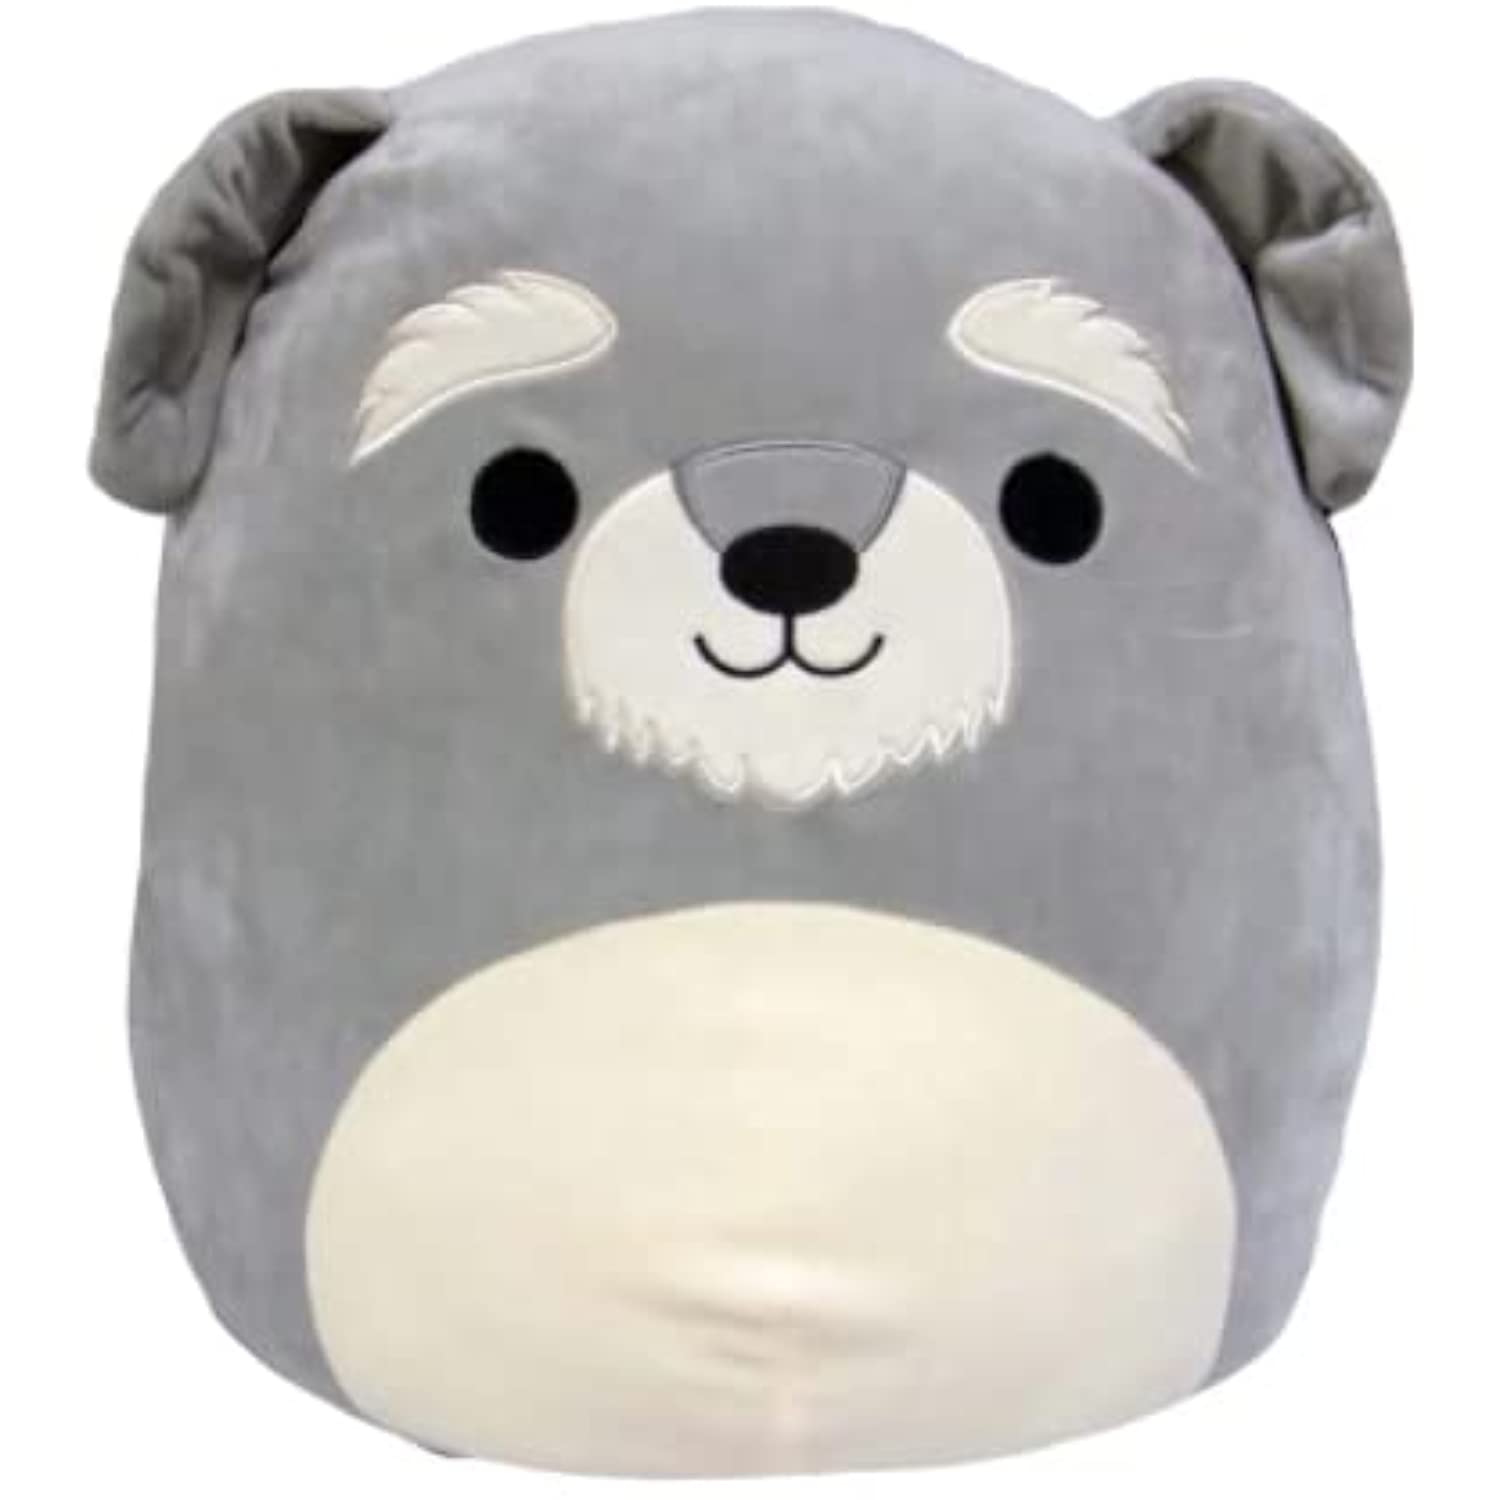 Squishmallows Squishmallow Official Kellytoy 11 Inch Soft Plush